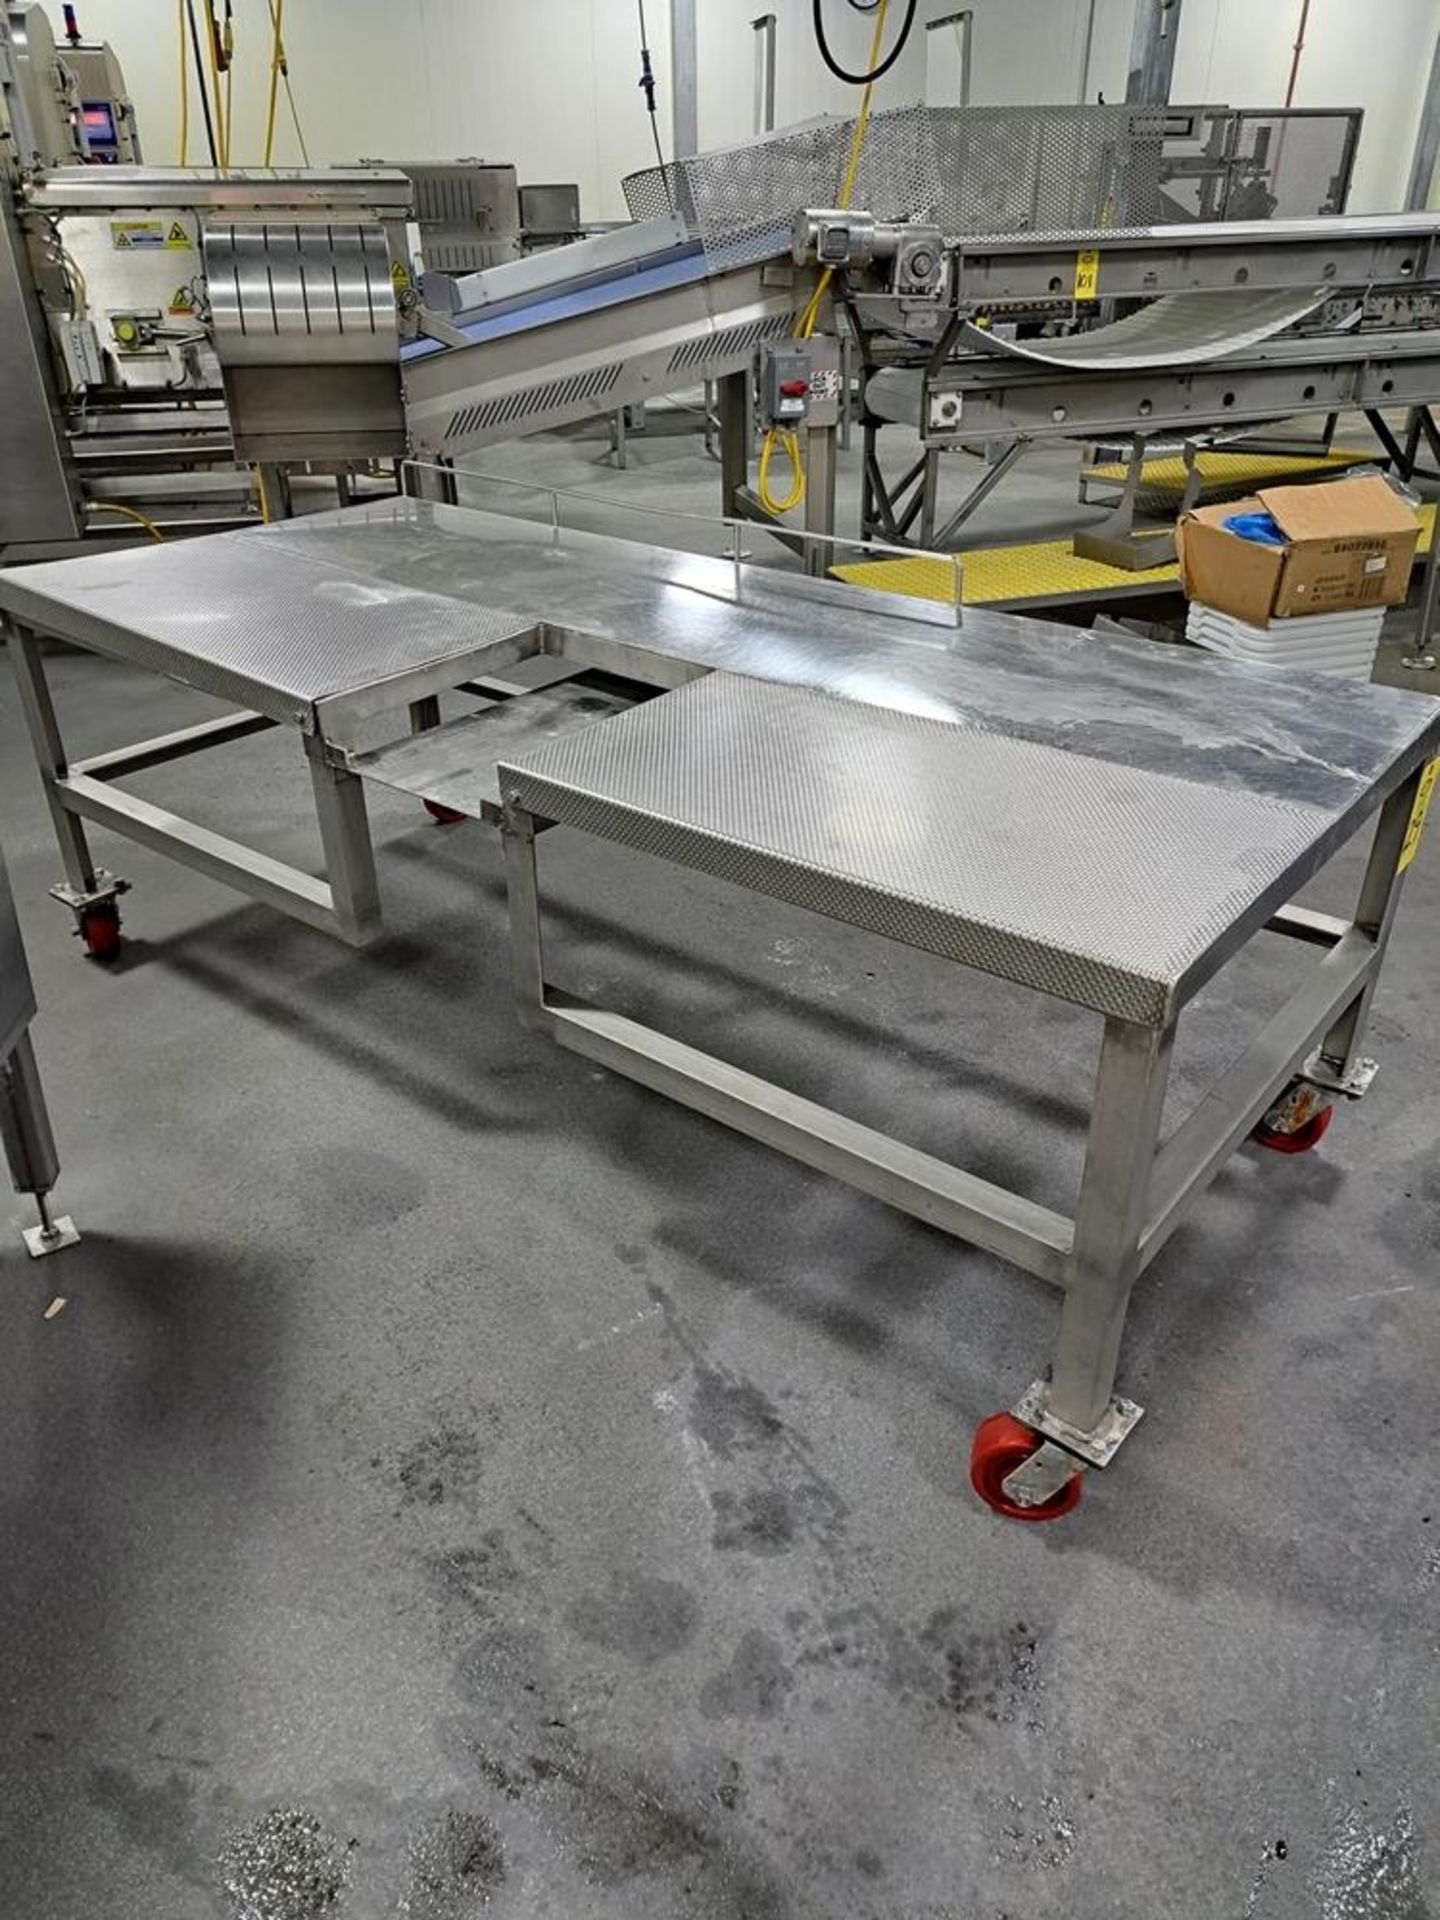 Stainless Steel Portable Pack-off Table, 36" W X 7' L X 30" T: Required Loading Fee $50.00, Rigger-